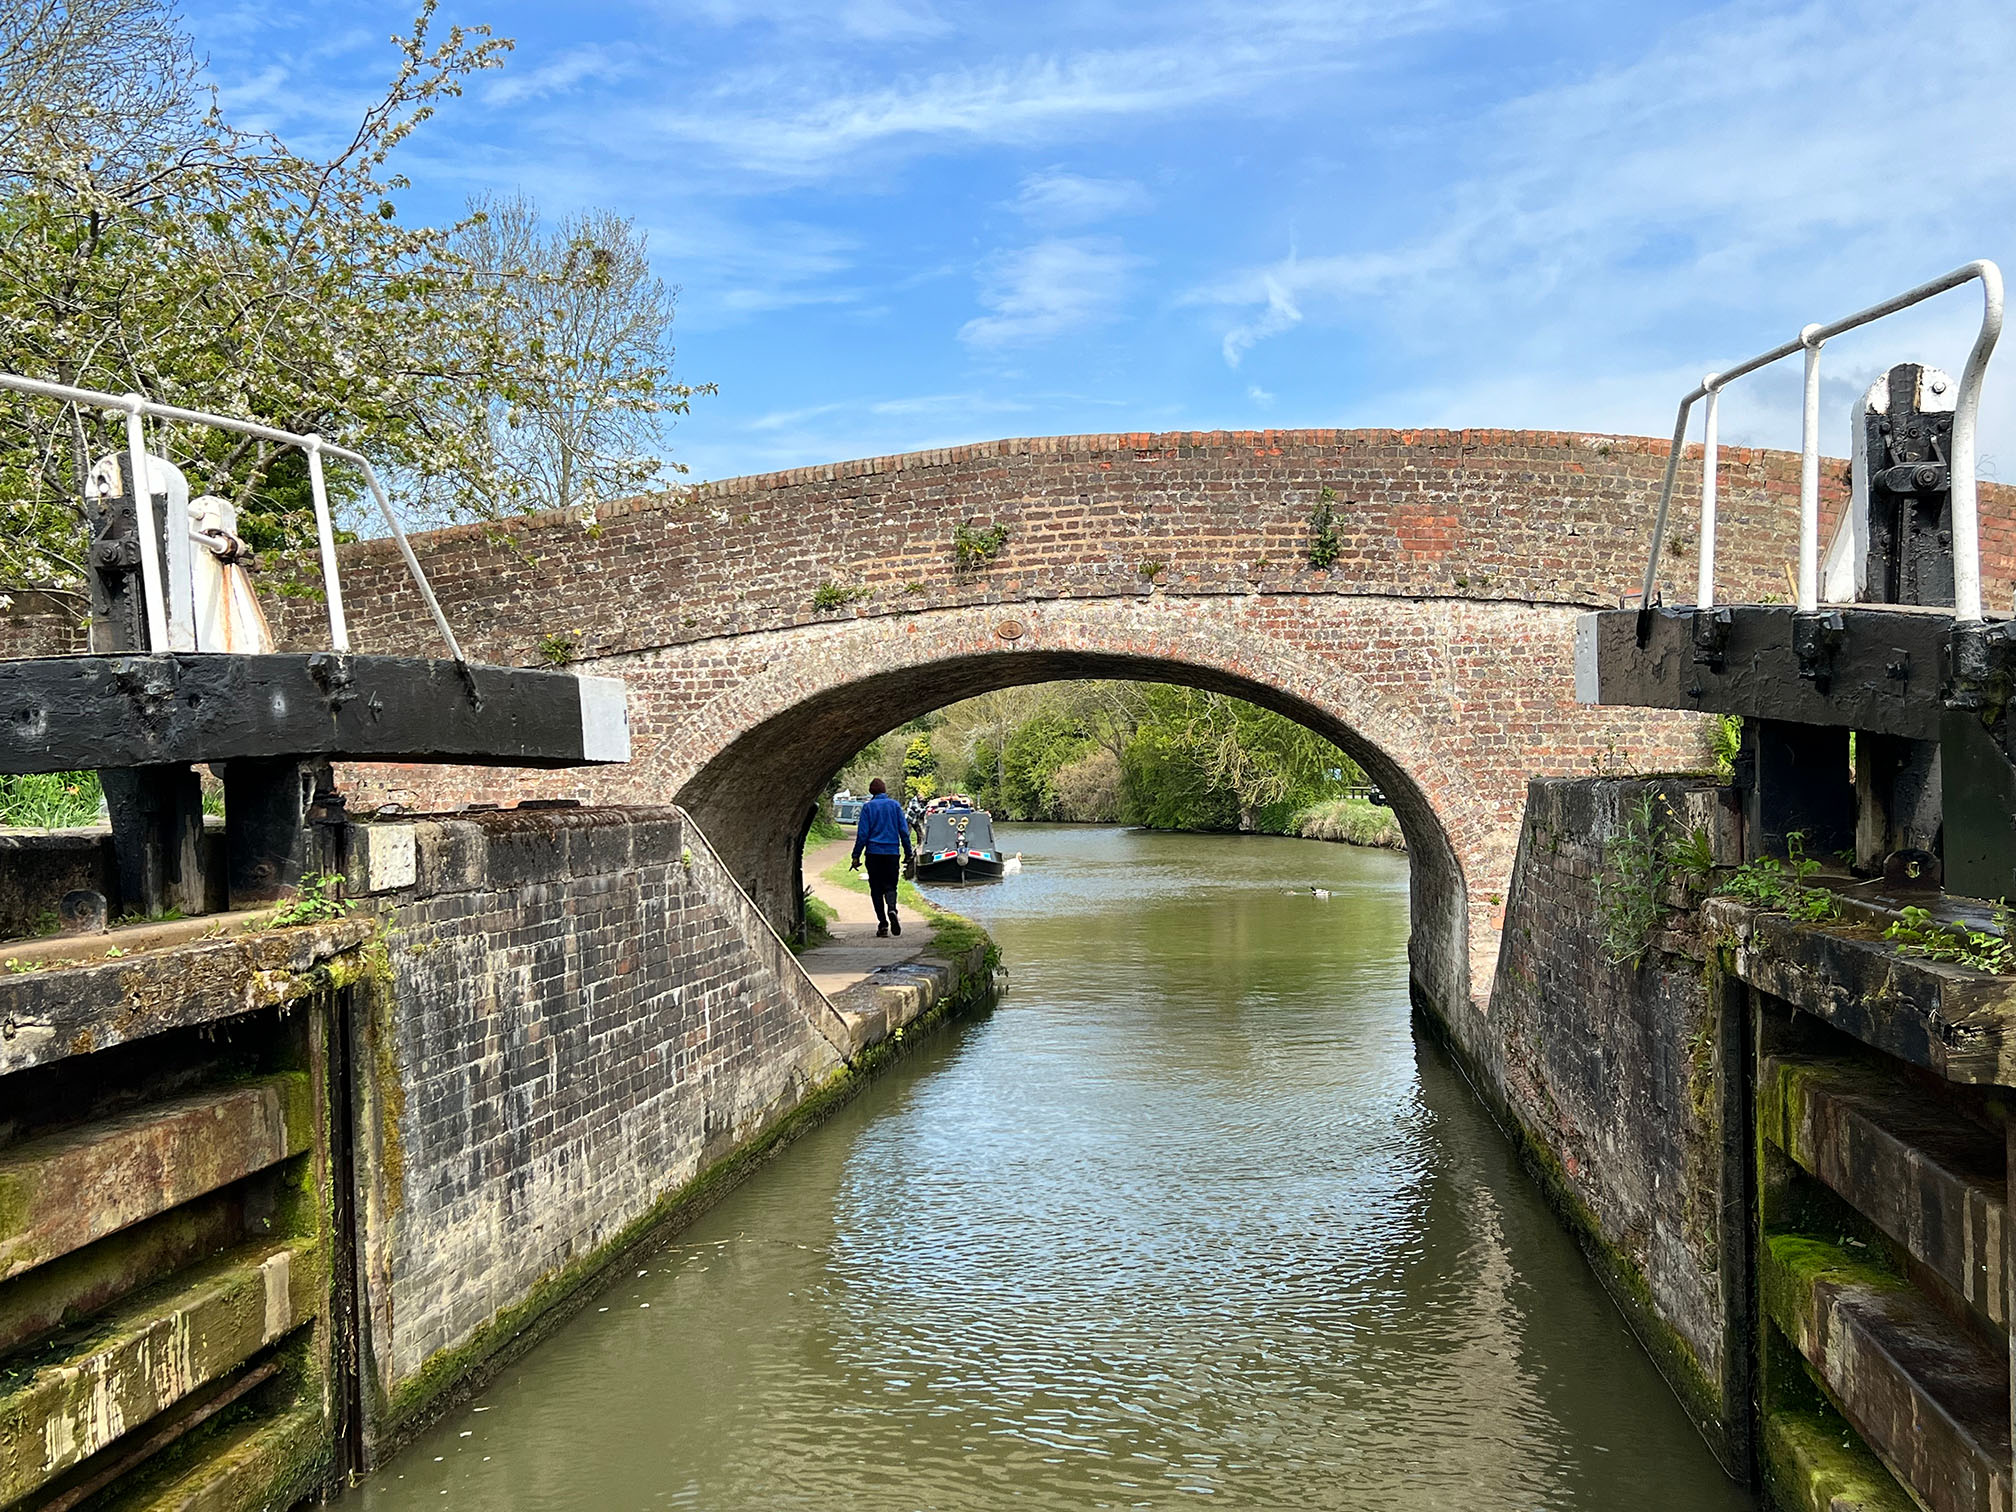 Bridge over a canal. Canal boat within a body of water.